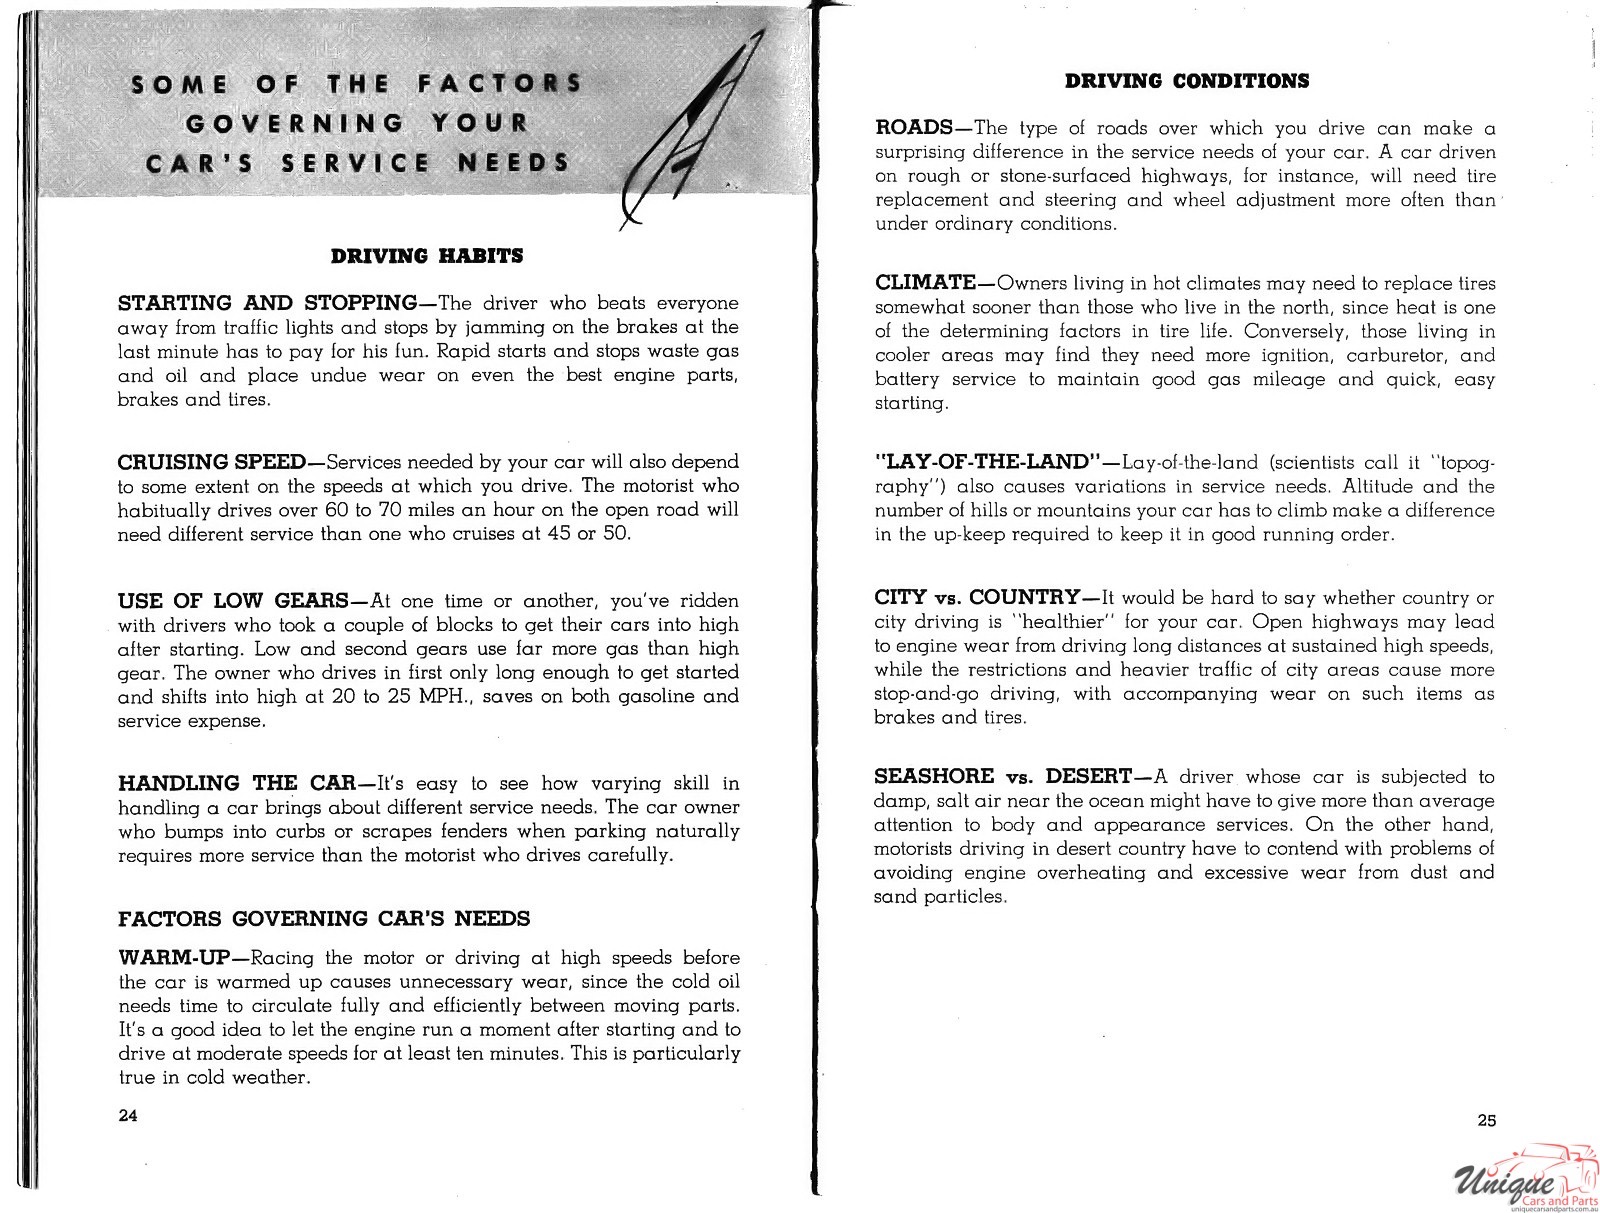 1950 Pontiac Owners Manual Page 14